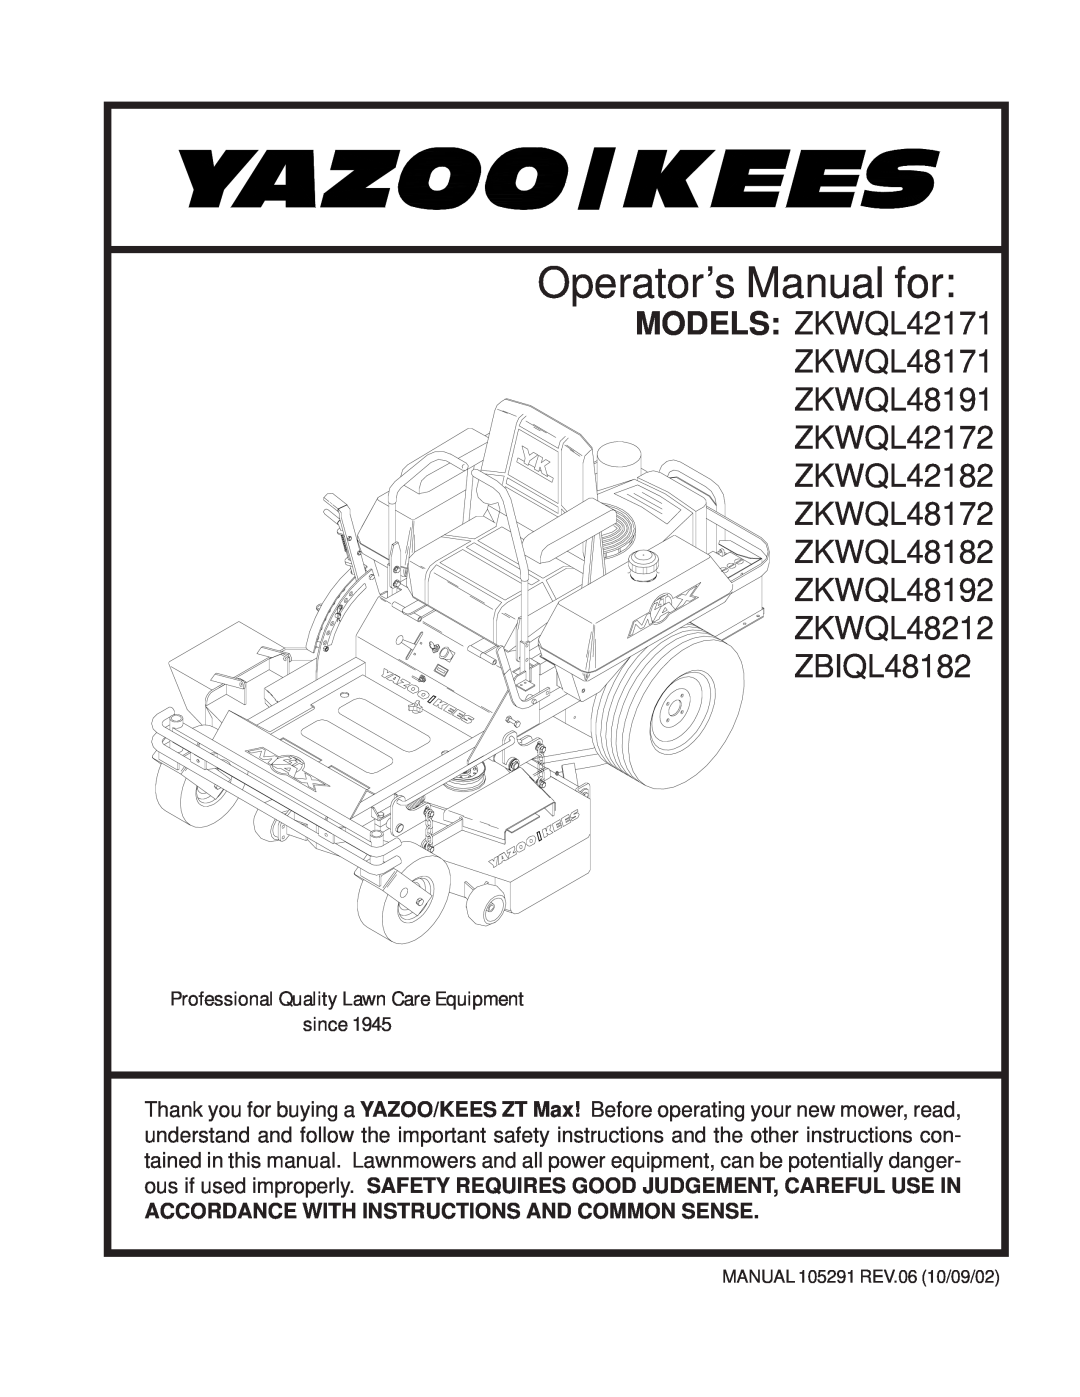 Yazoo/Kees important safety instructions Operator’s Manual for, MODELS ZKWQL42171 ZKWQL48171 ZKWQL48191 